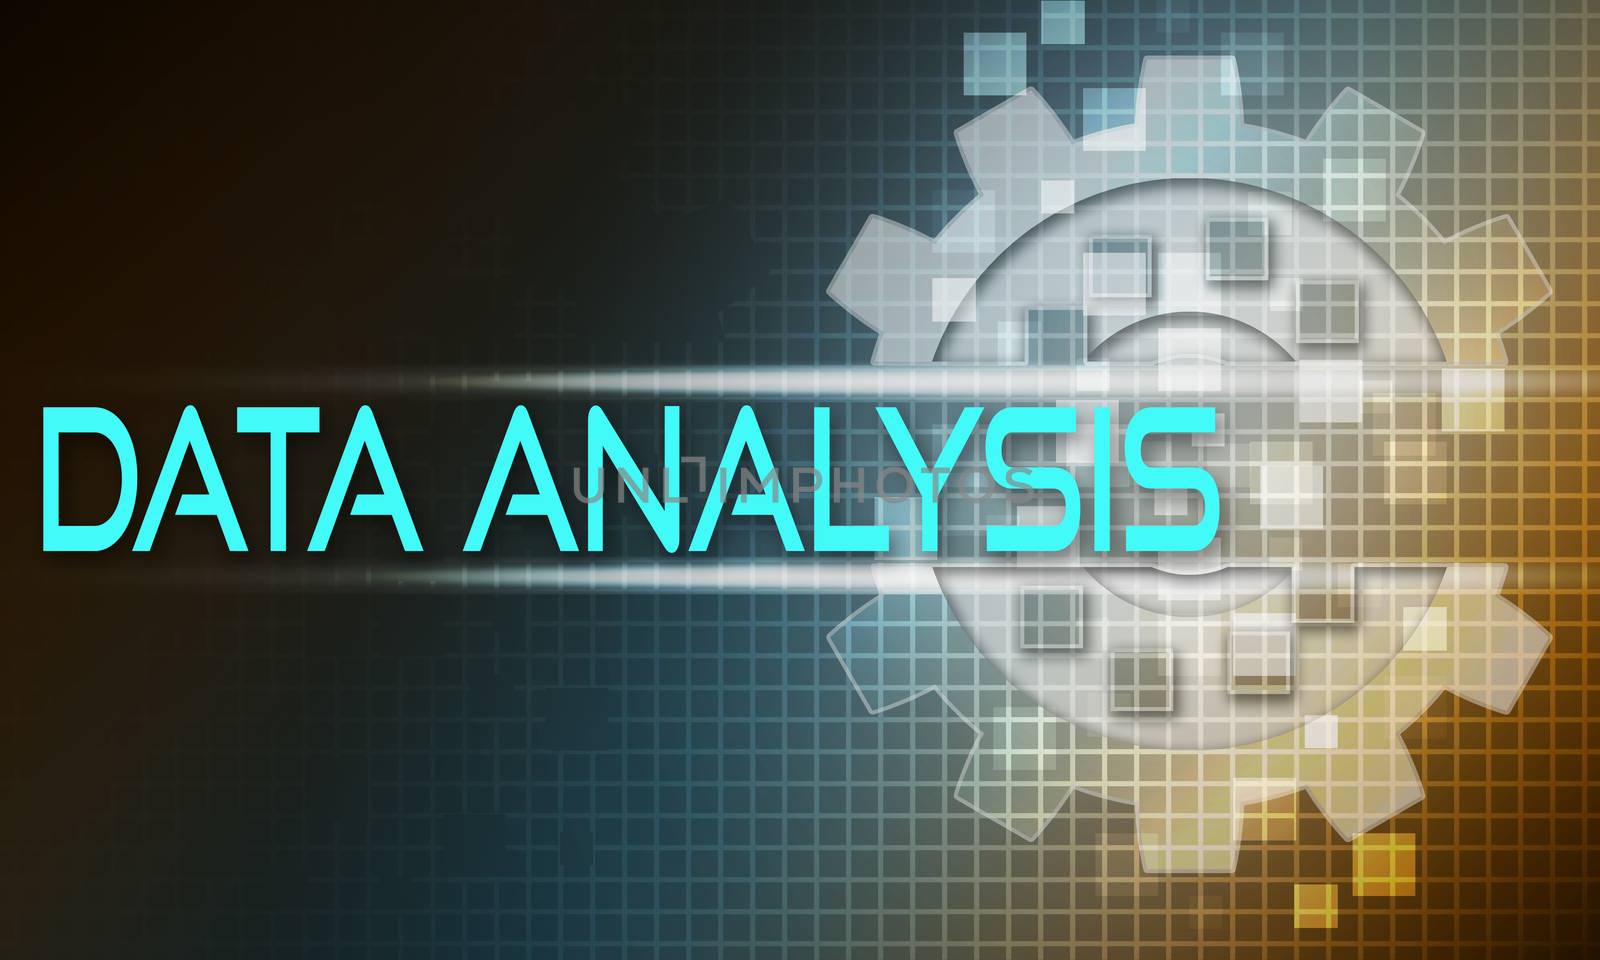 Data analysis concept text on the mechanism of gears. Technology background, 3d rendering.